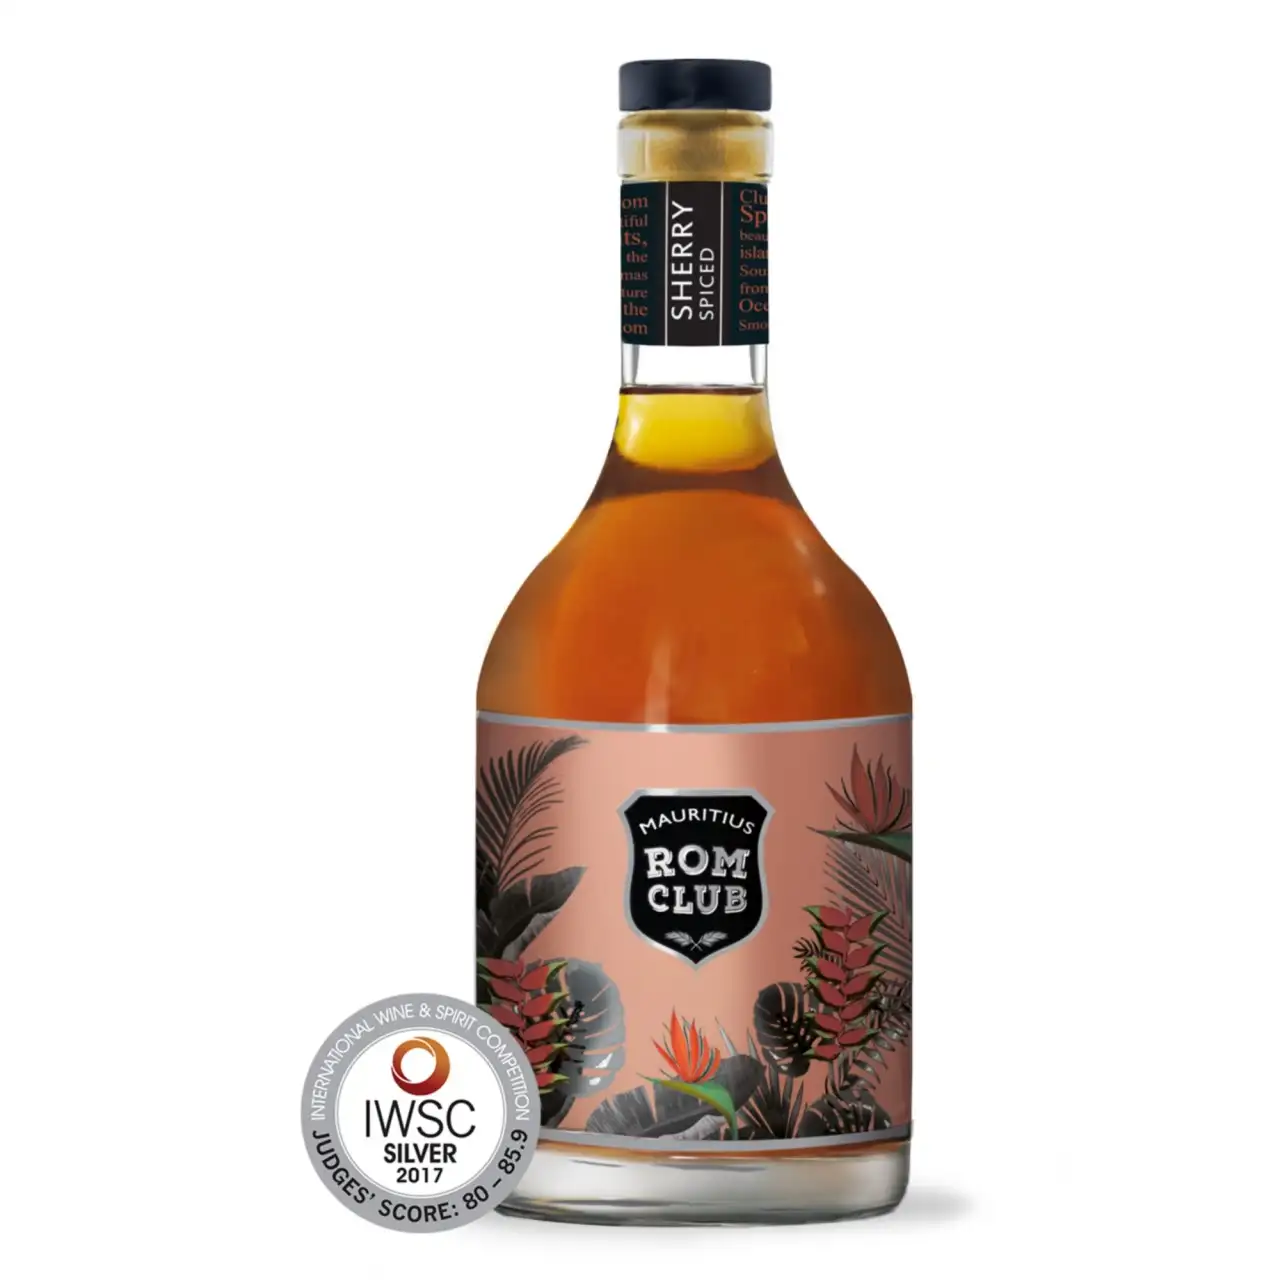 Image of the front of the bottle of the rum Mauritius Club Dark Rum